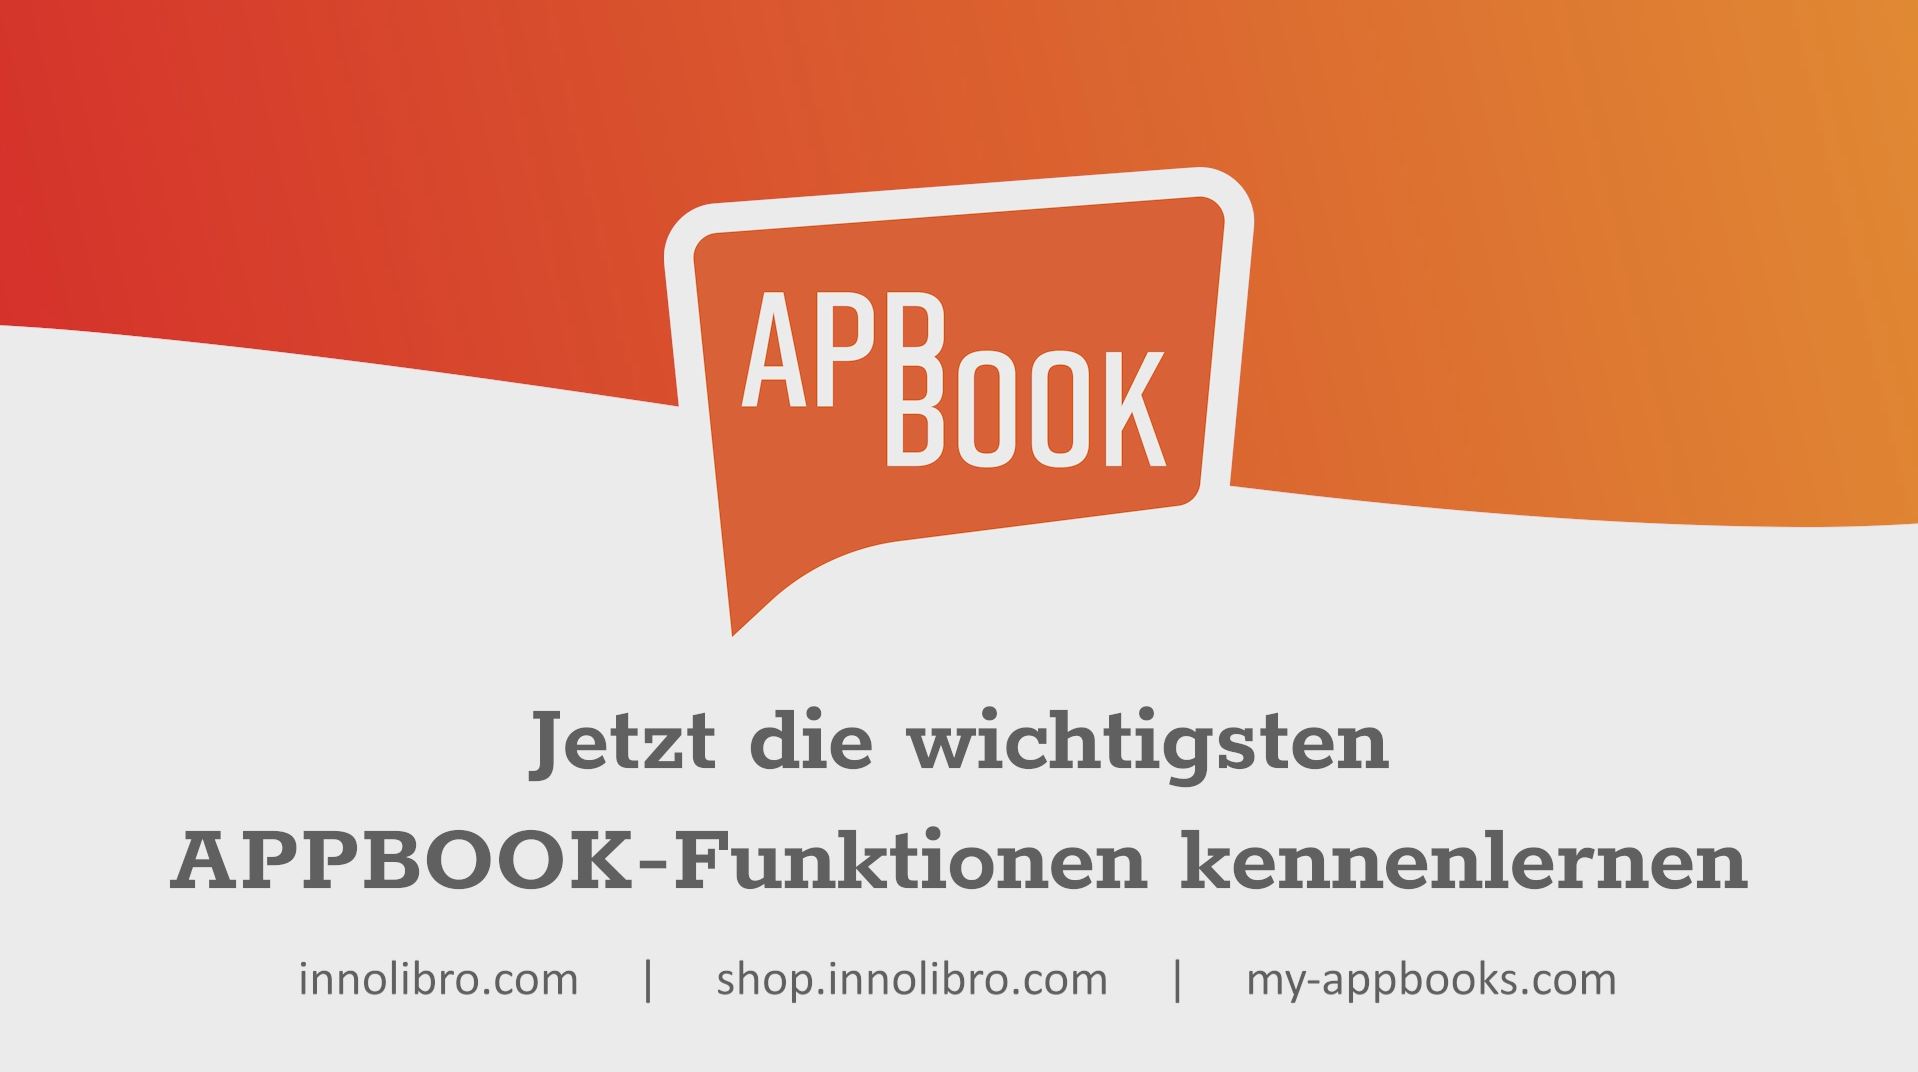 Appbook CRM + Marketing Automation 